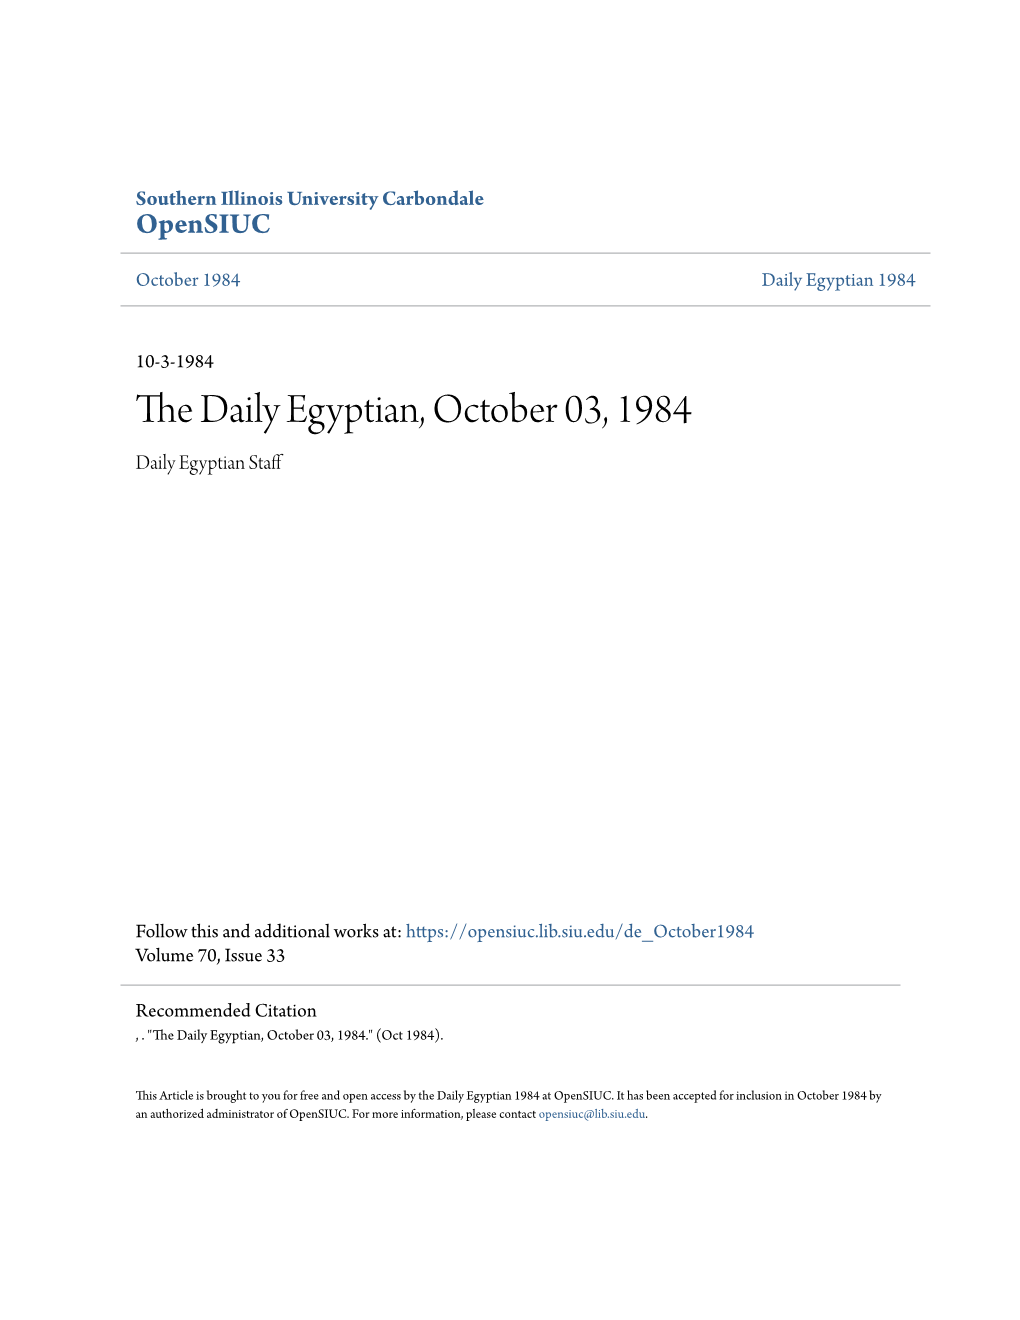 The Daily Egyptian, October 03, 1984